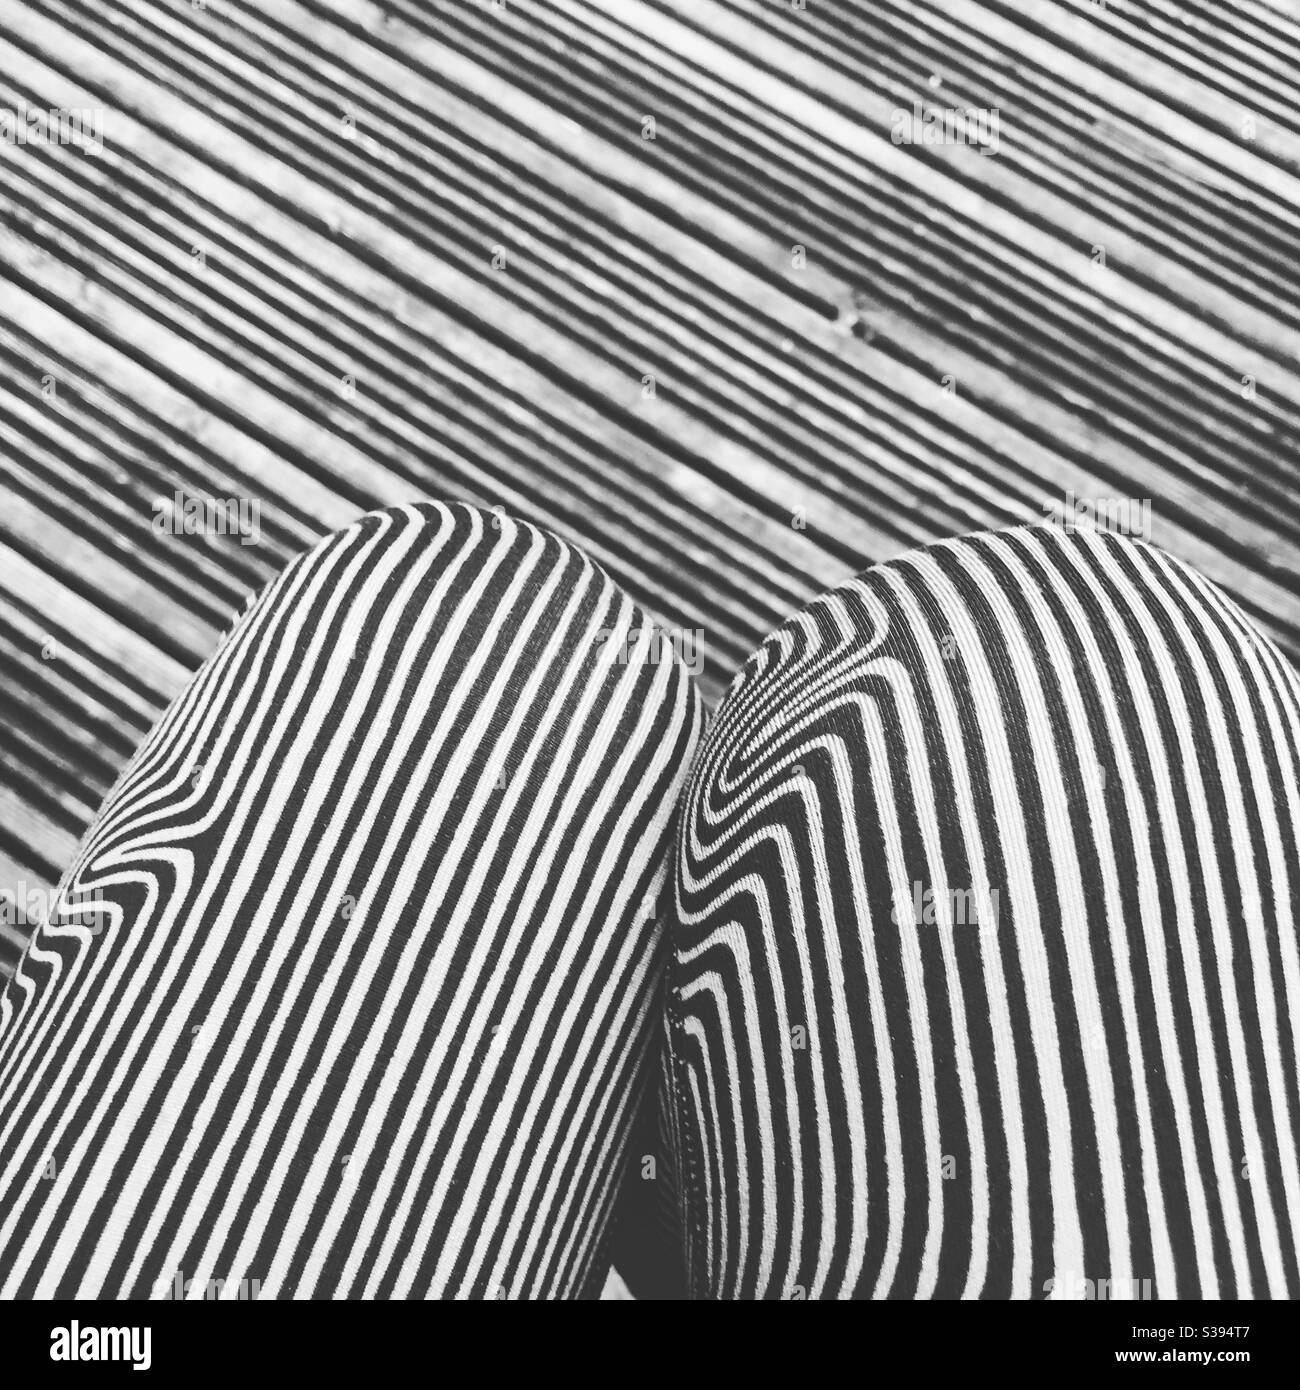 Patterns, decking and leggings in black and white Stock Photo